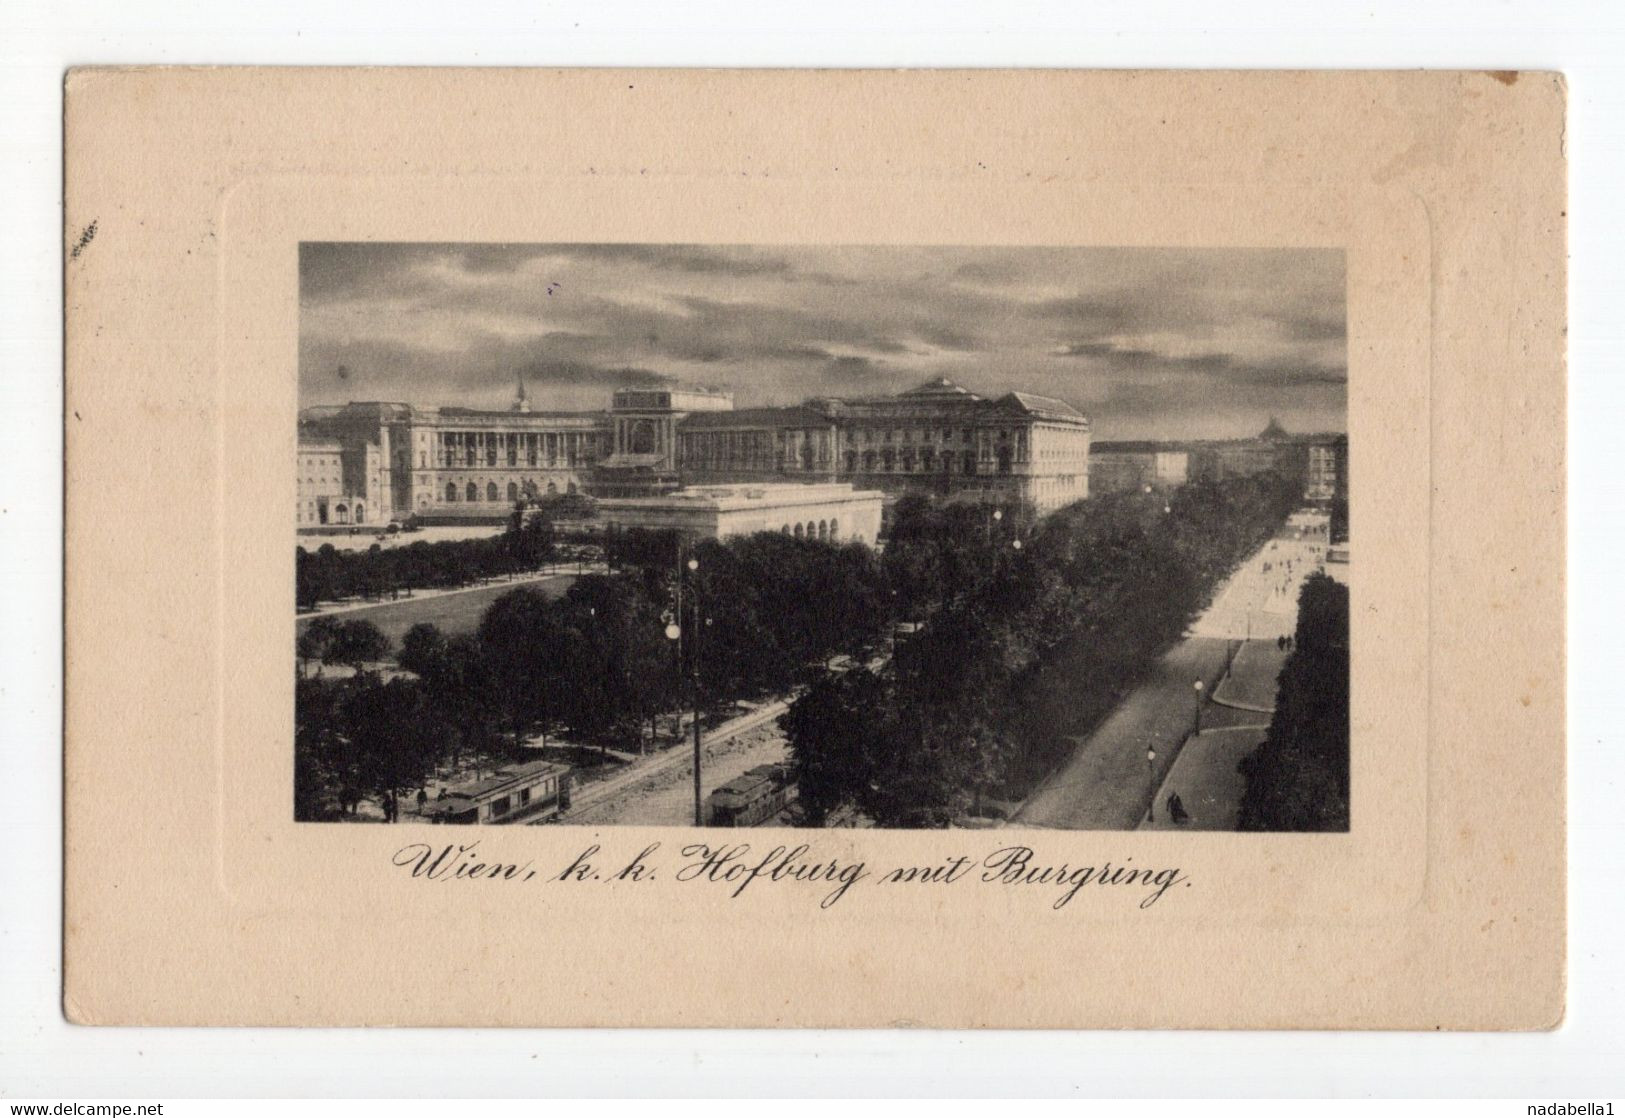 1914. WWI MILITARY CARD SENT FROM VIENNA TO ZAGREB,CROATIA,HOFBURG WITH BURGRING,ILLUSTRATED POSTCARD,USED - Ringstrasse